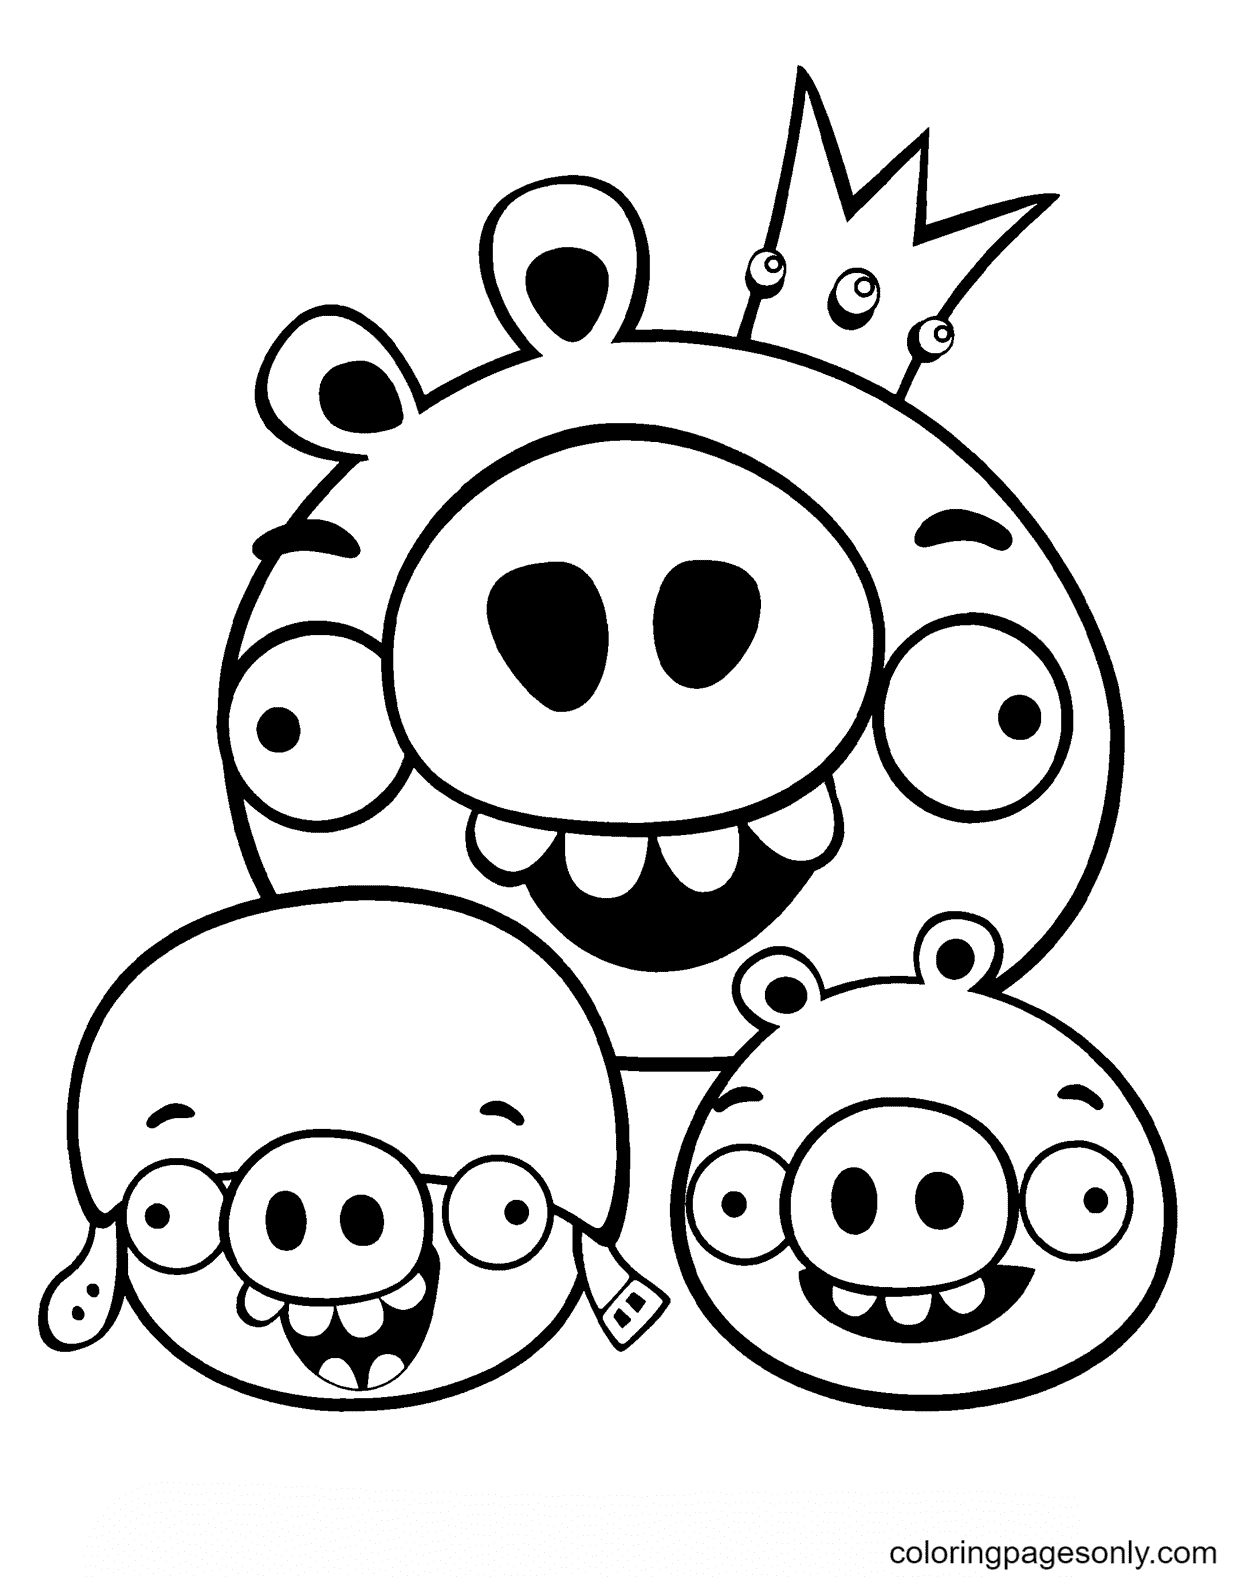 King Pig, Corporal and Minion Coloring Page